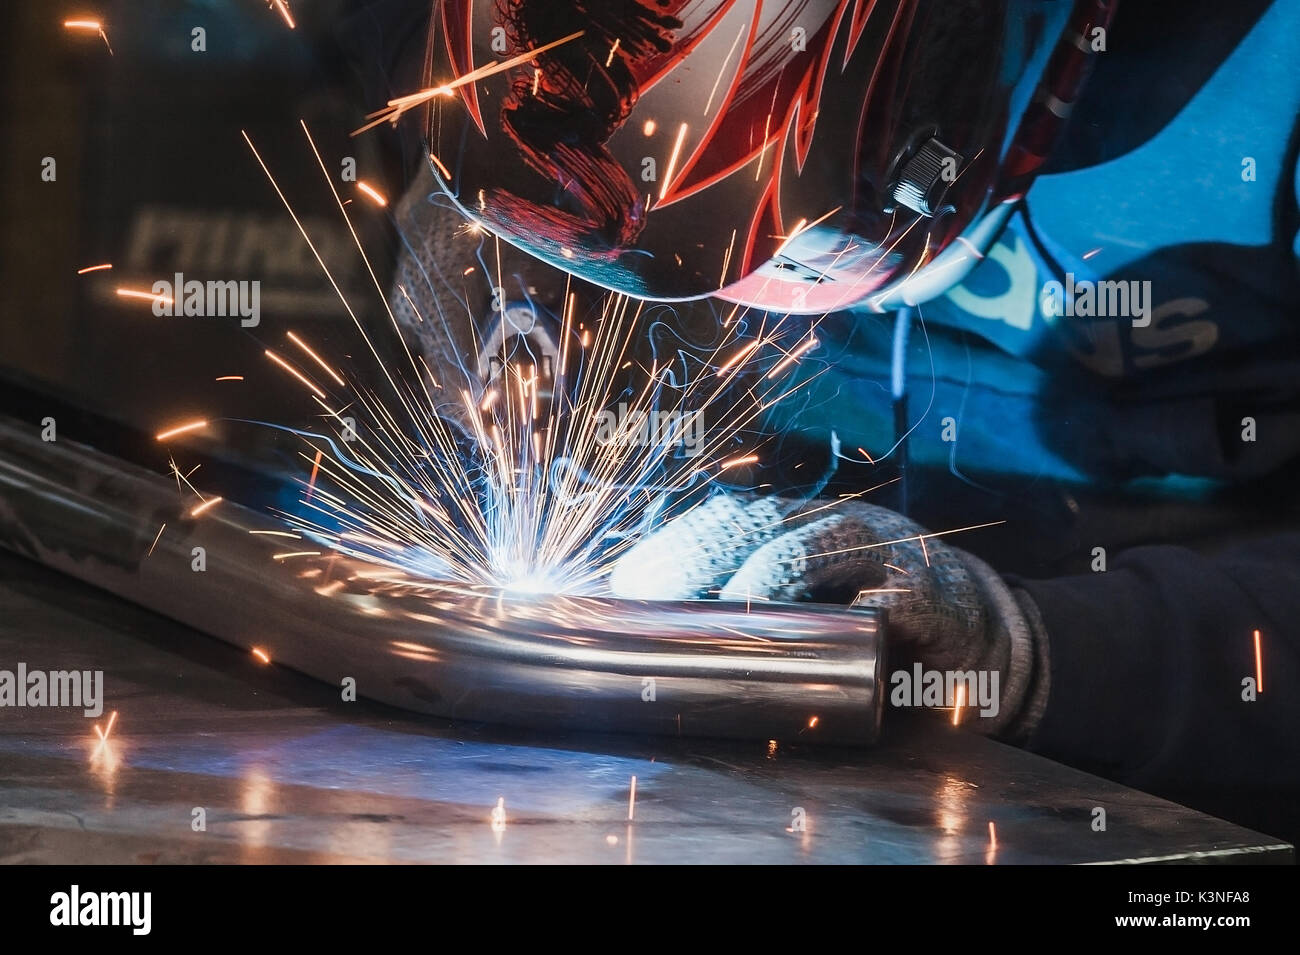 Welder in a steep welding mask welds metal parts with a lot of sparks Stock Photo